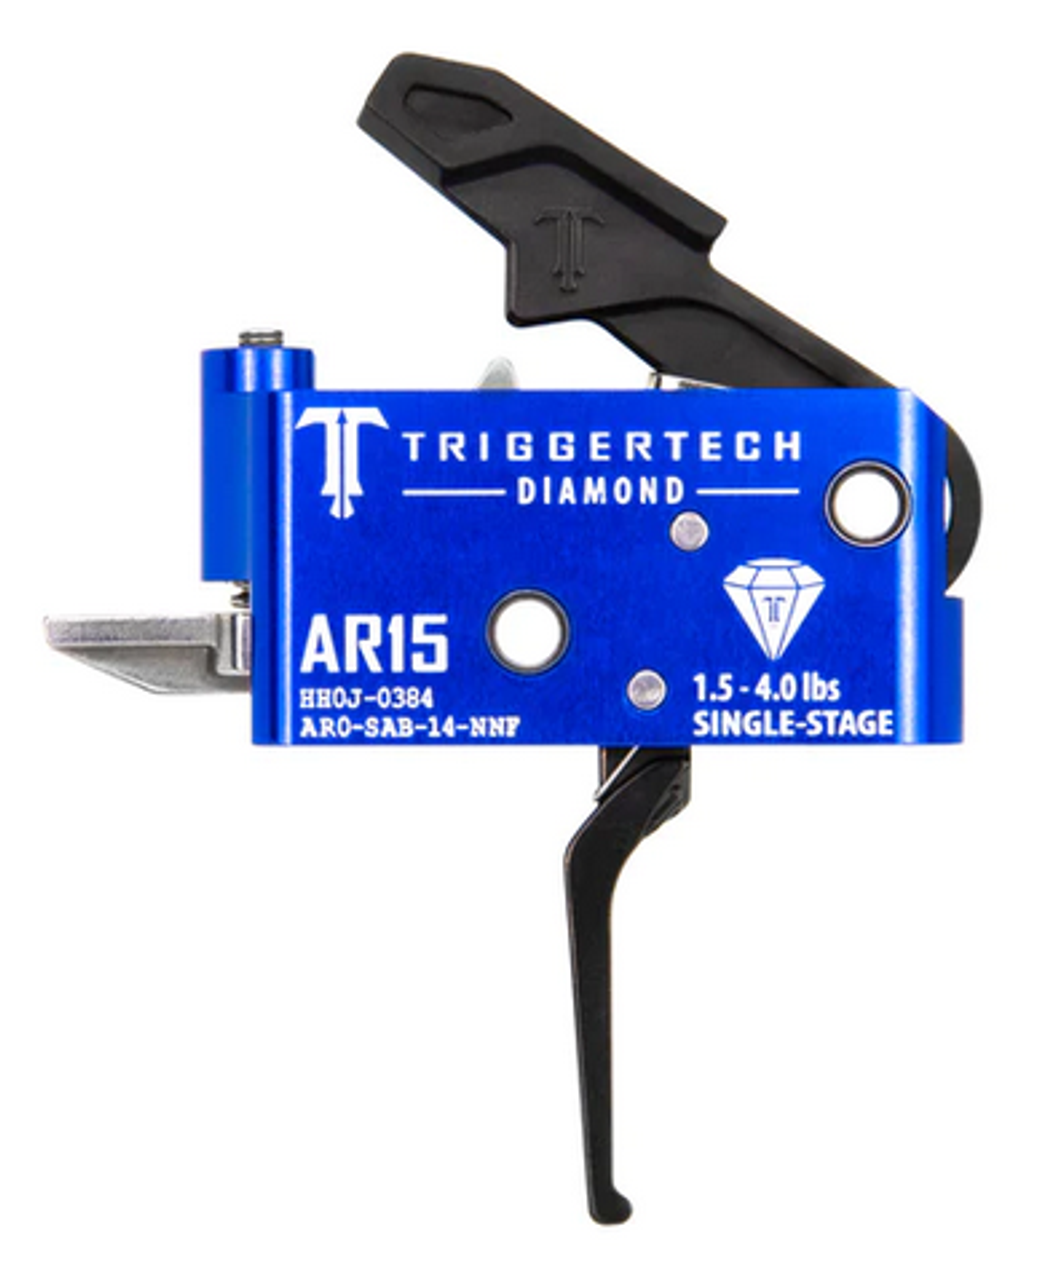 Trigger Tech AR-15 Single Stage Drop-In Trigger